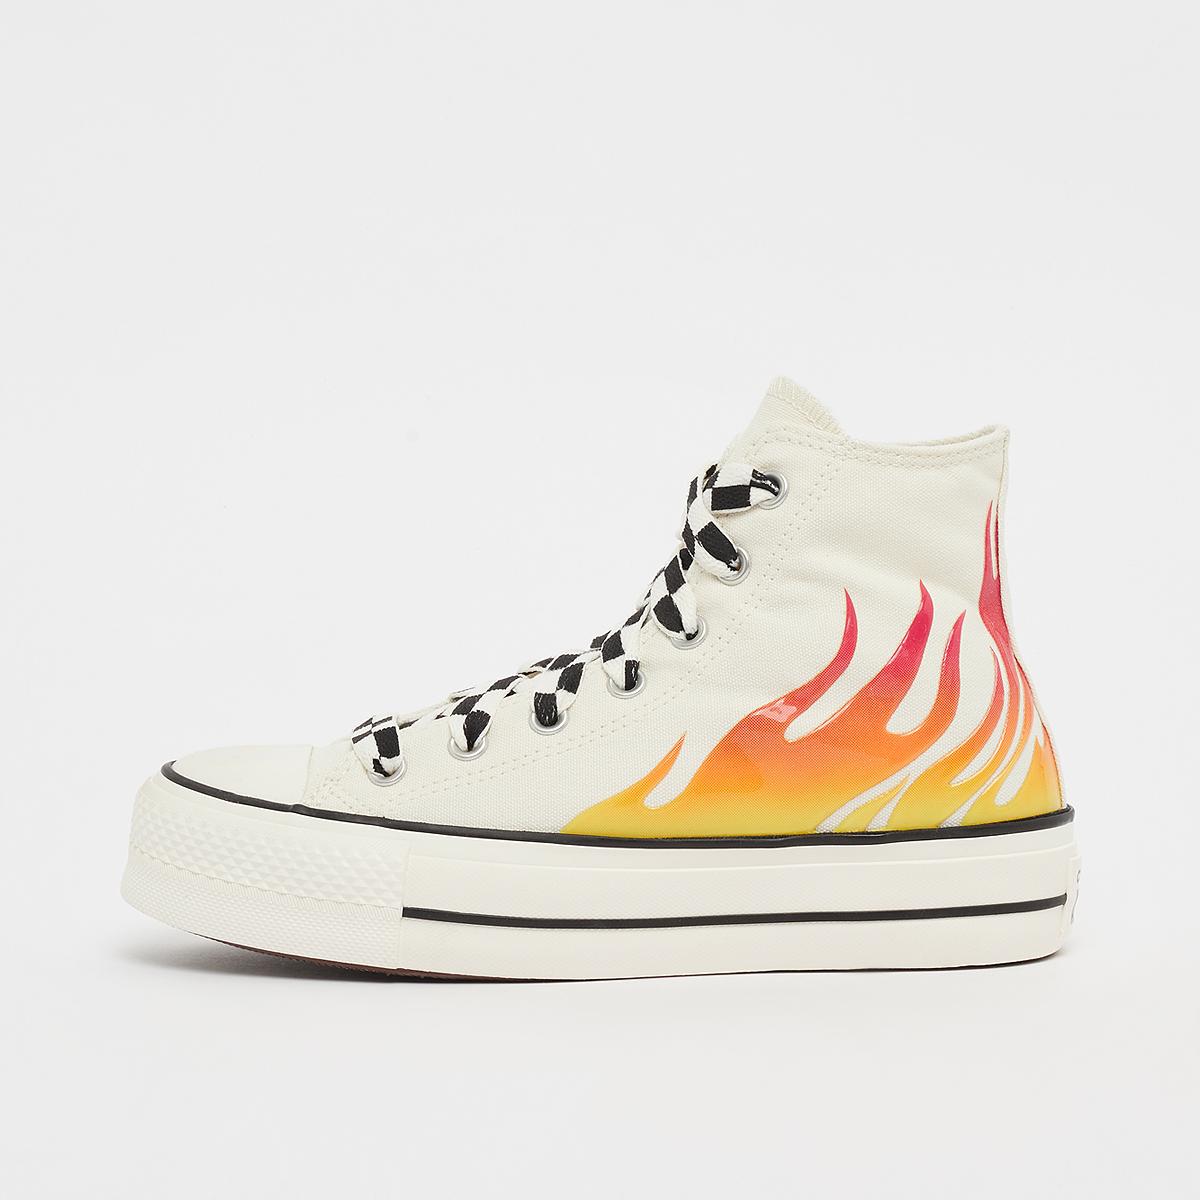 Chuck Taylor All Star, Converse, Footwear, lift egret/enamel red/black, taille: 37